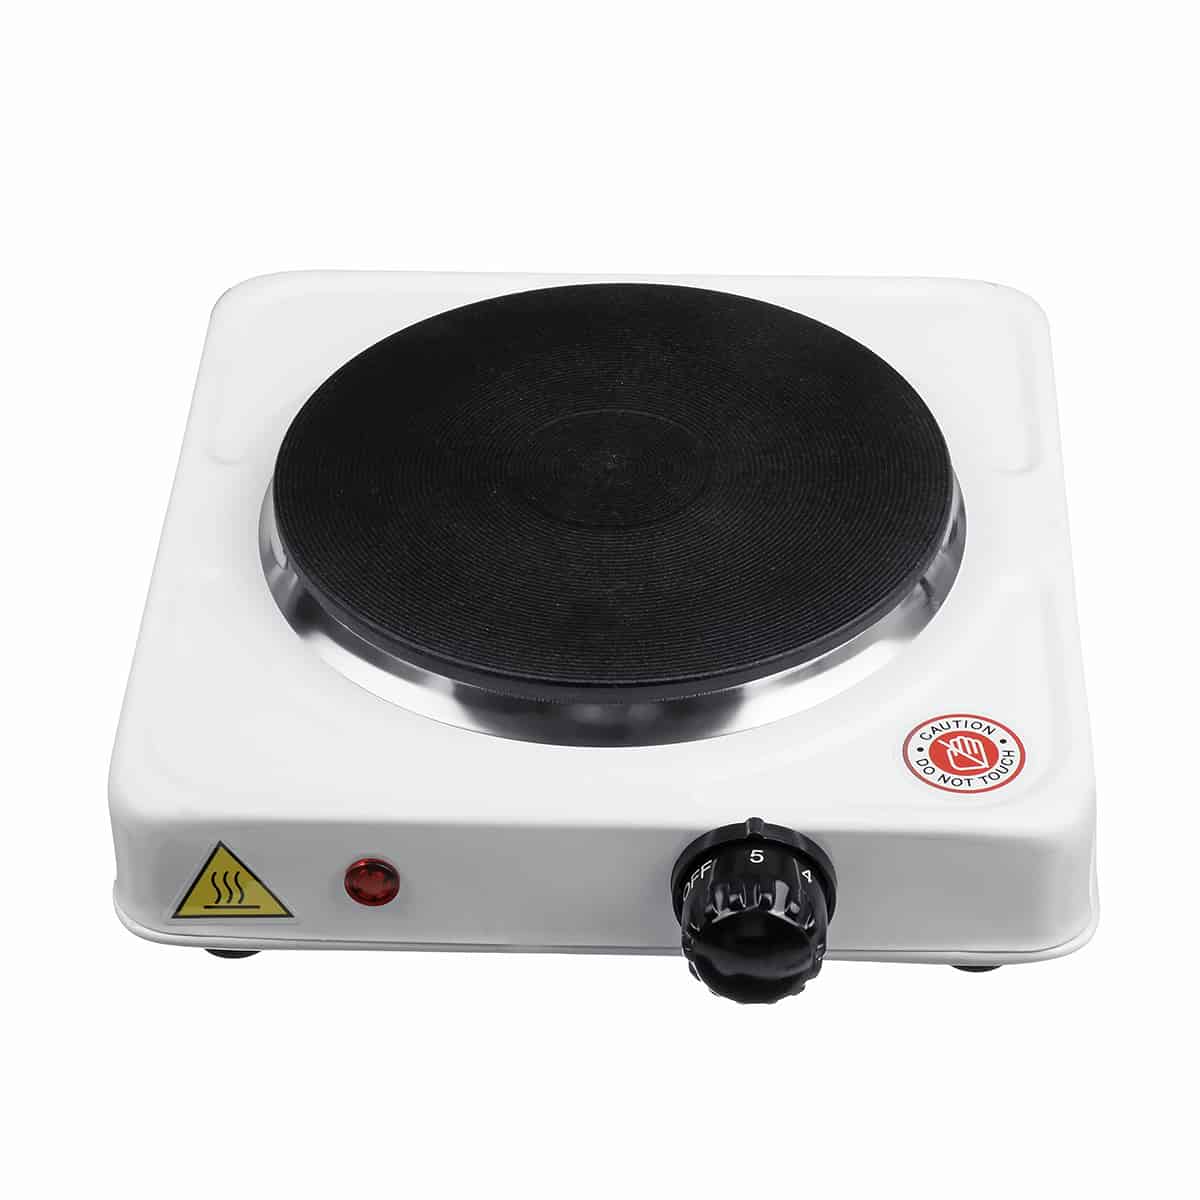 Portable Electric Stove Burner Hot Plate Heater for Cooking 110V 1000W  White